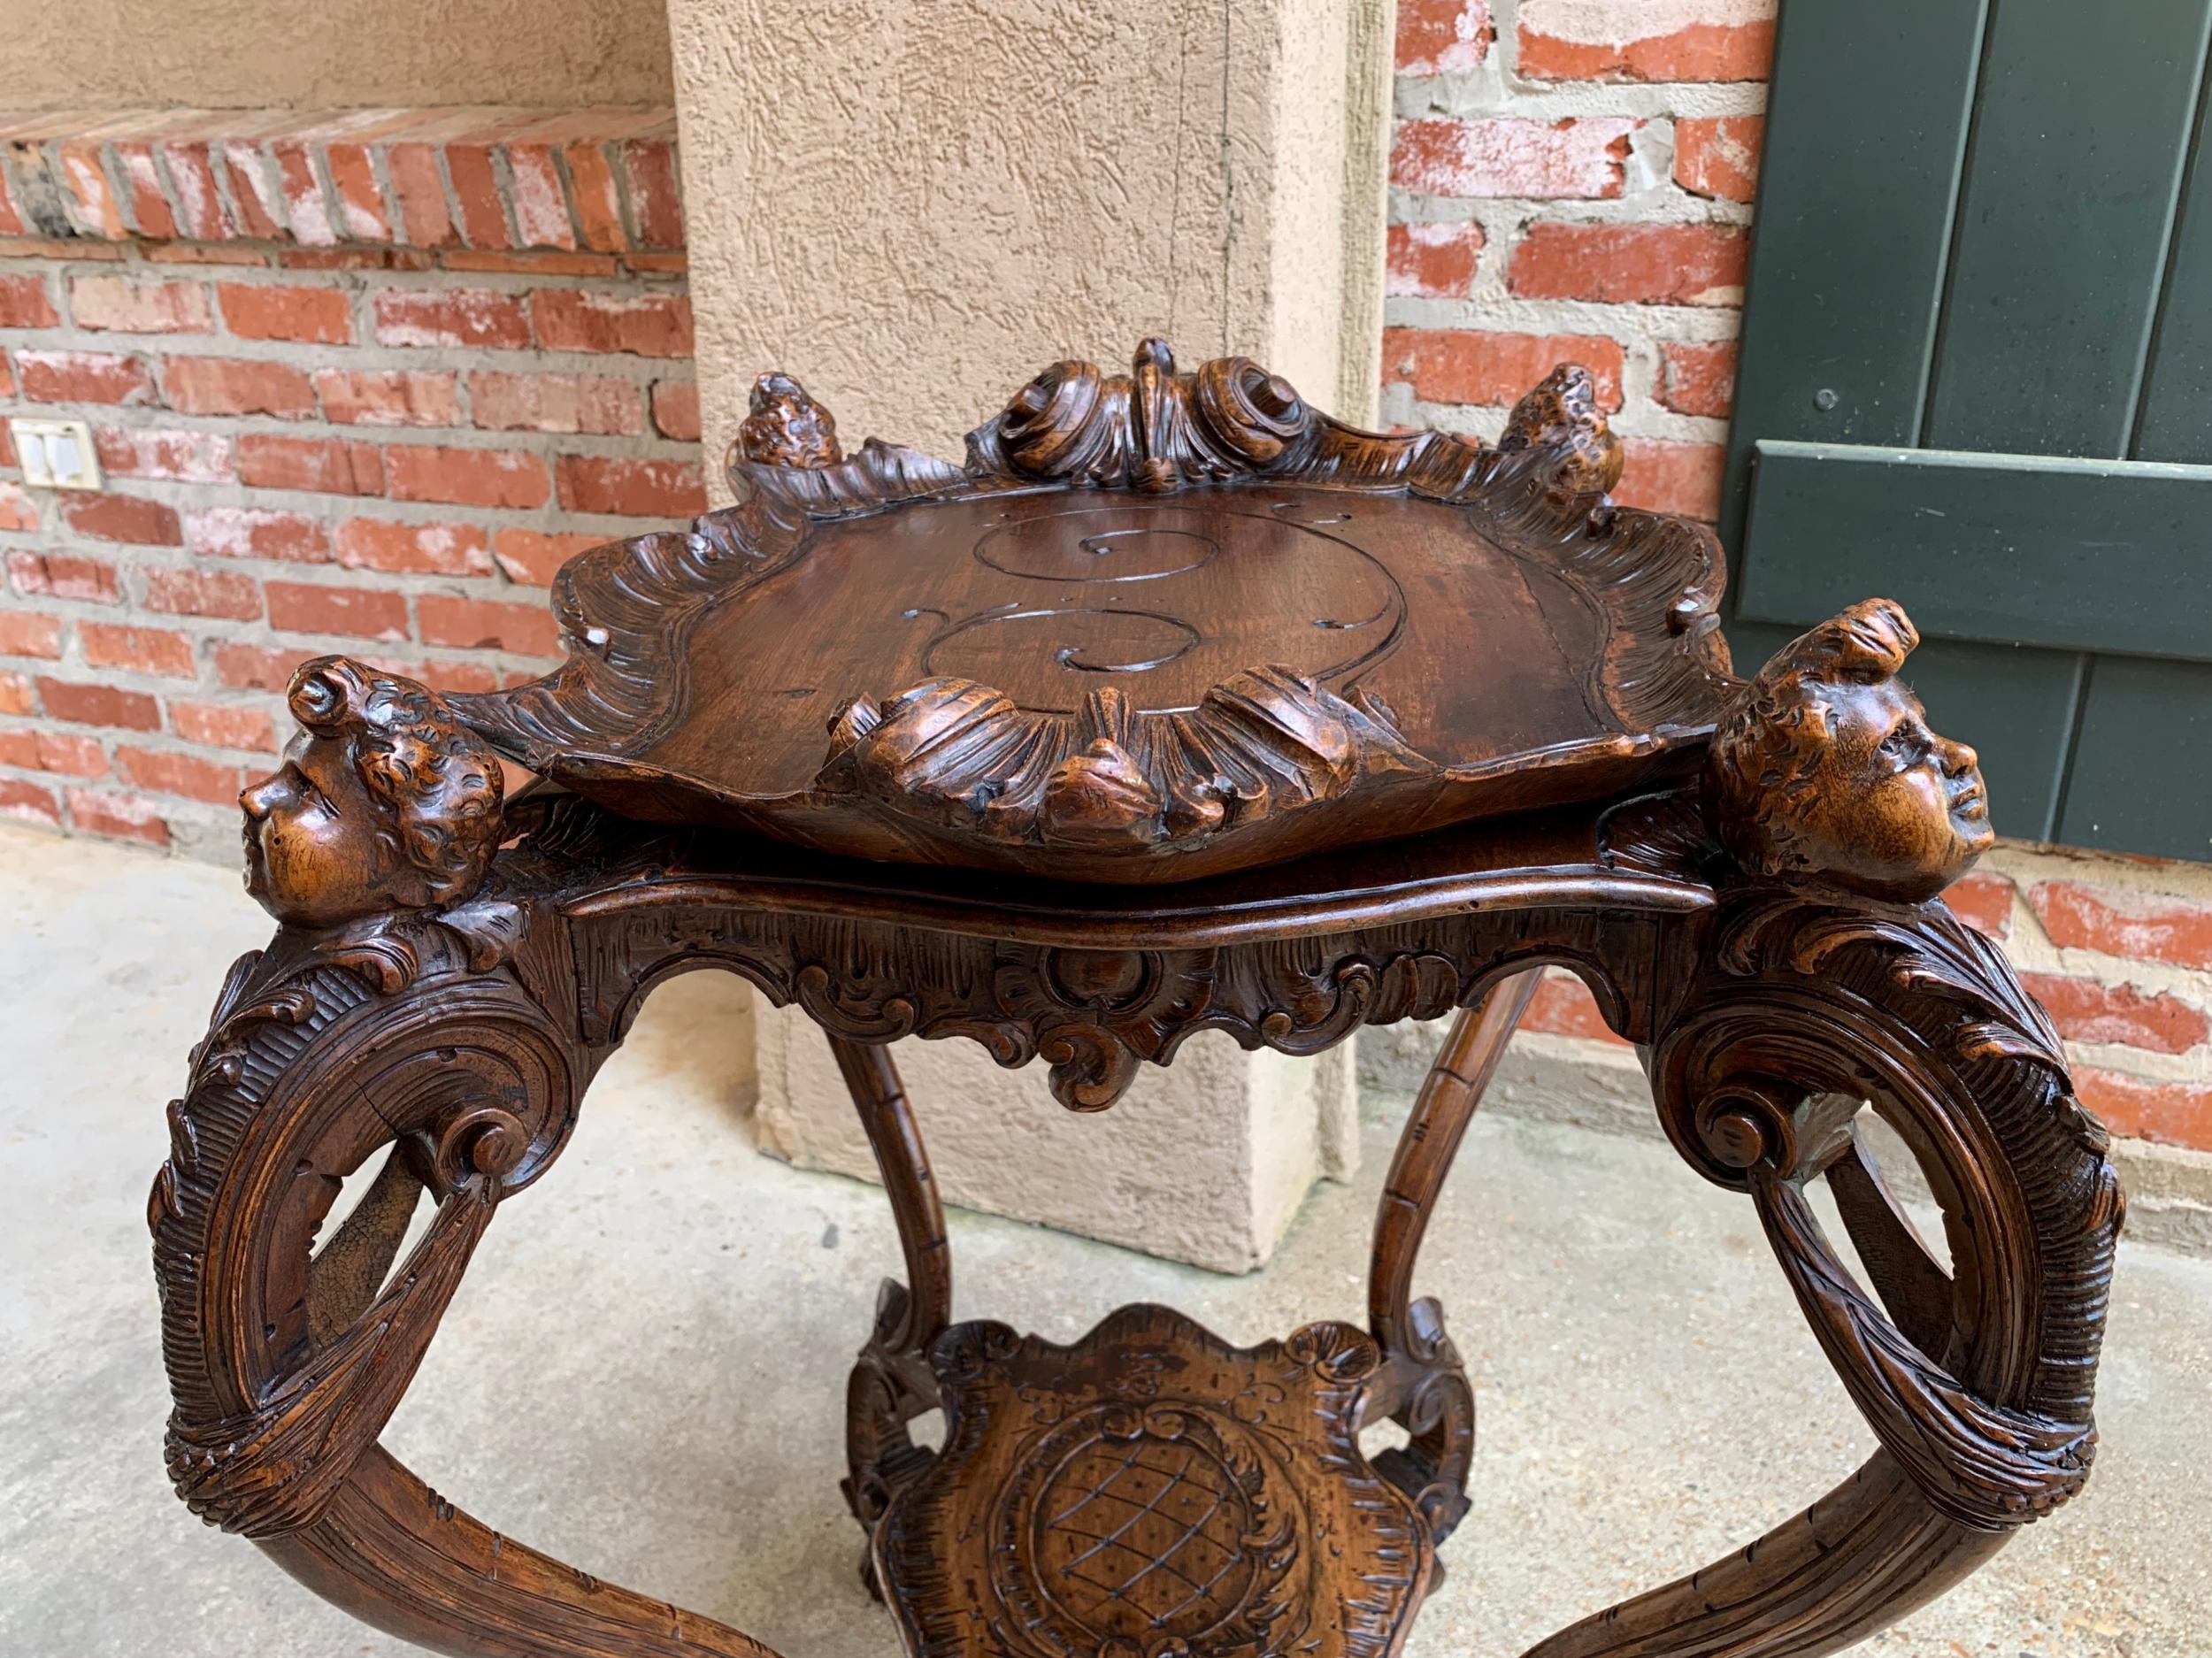 19th century French Carved Oak Sofa Dessert Table Serving Tray Louis XV Cherub For Sale 5